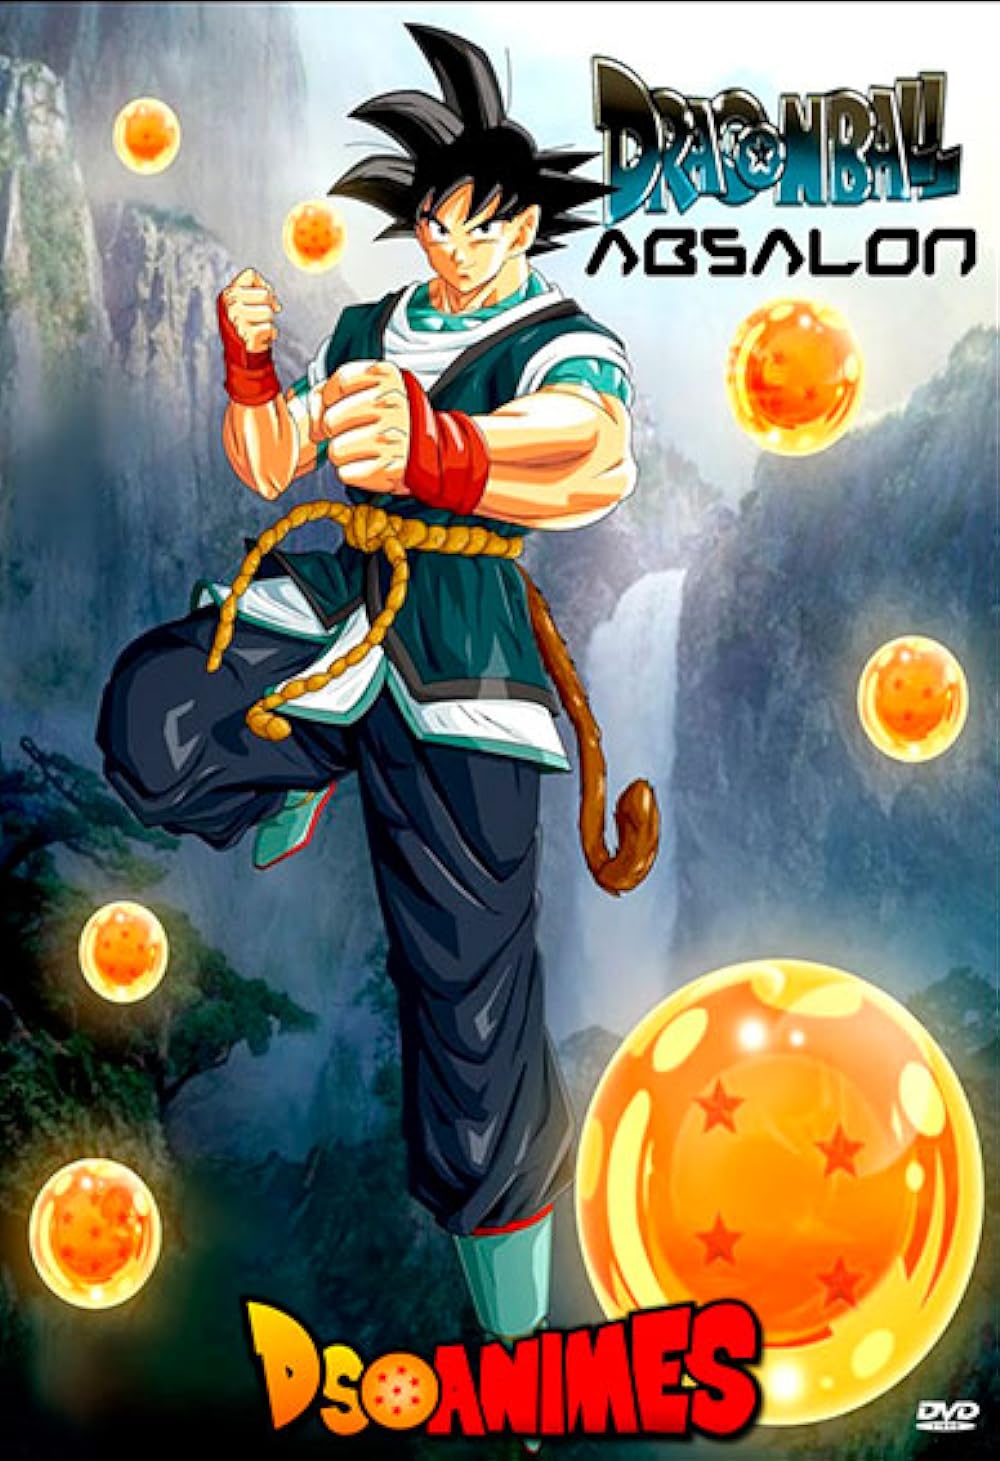 donna juan recommends dragonball absalon episode 6 pic